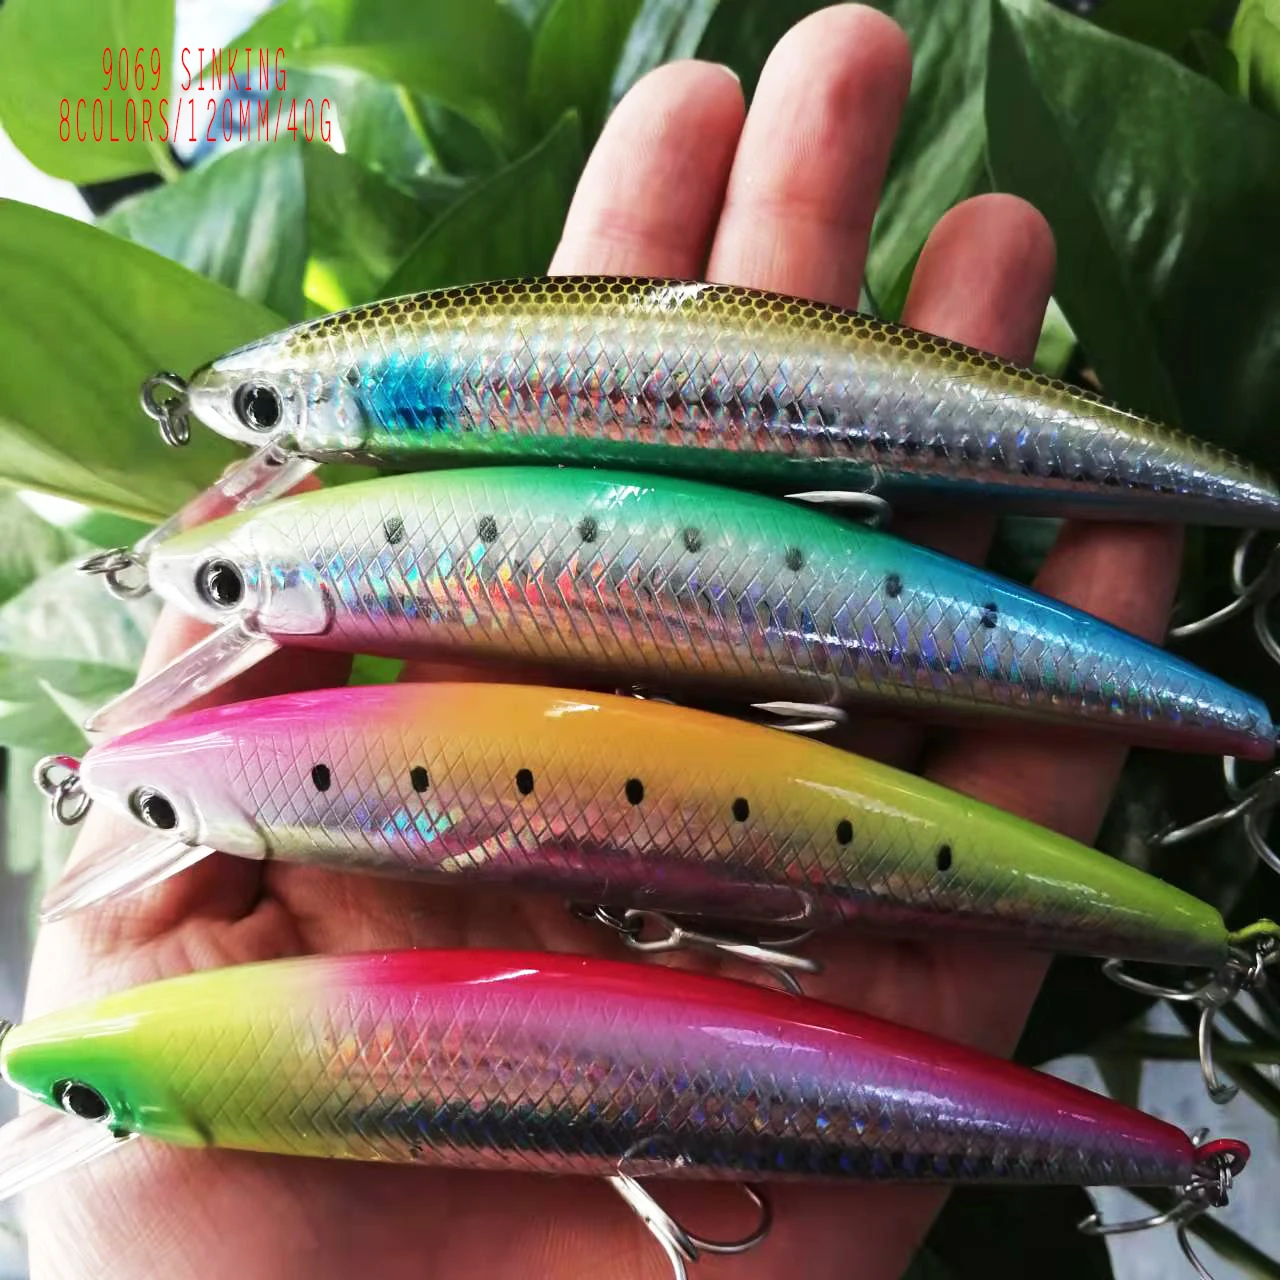 

120mm 40g Pesca Fishing bait Bass Lure Long Distance Casting Hard Plastic Heavy Sinking Minnow Lures Wobbler for Fishing 9069